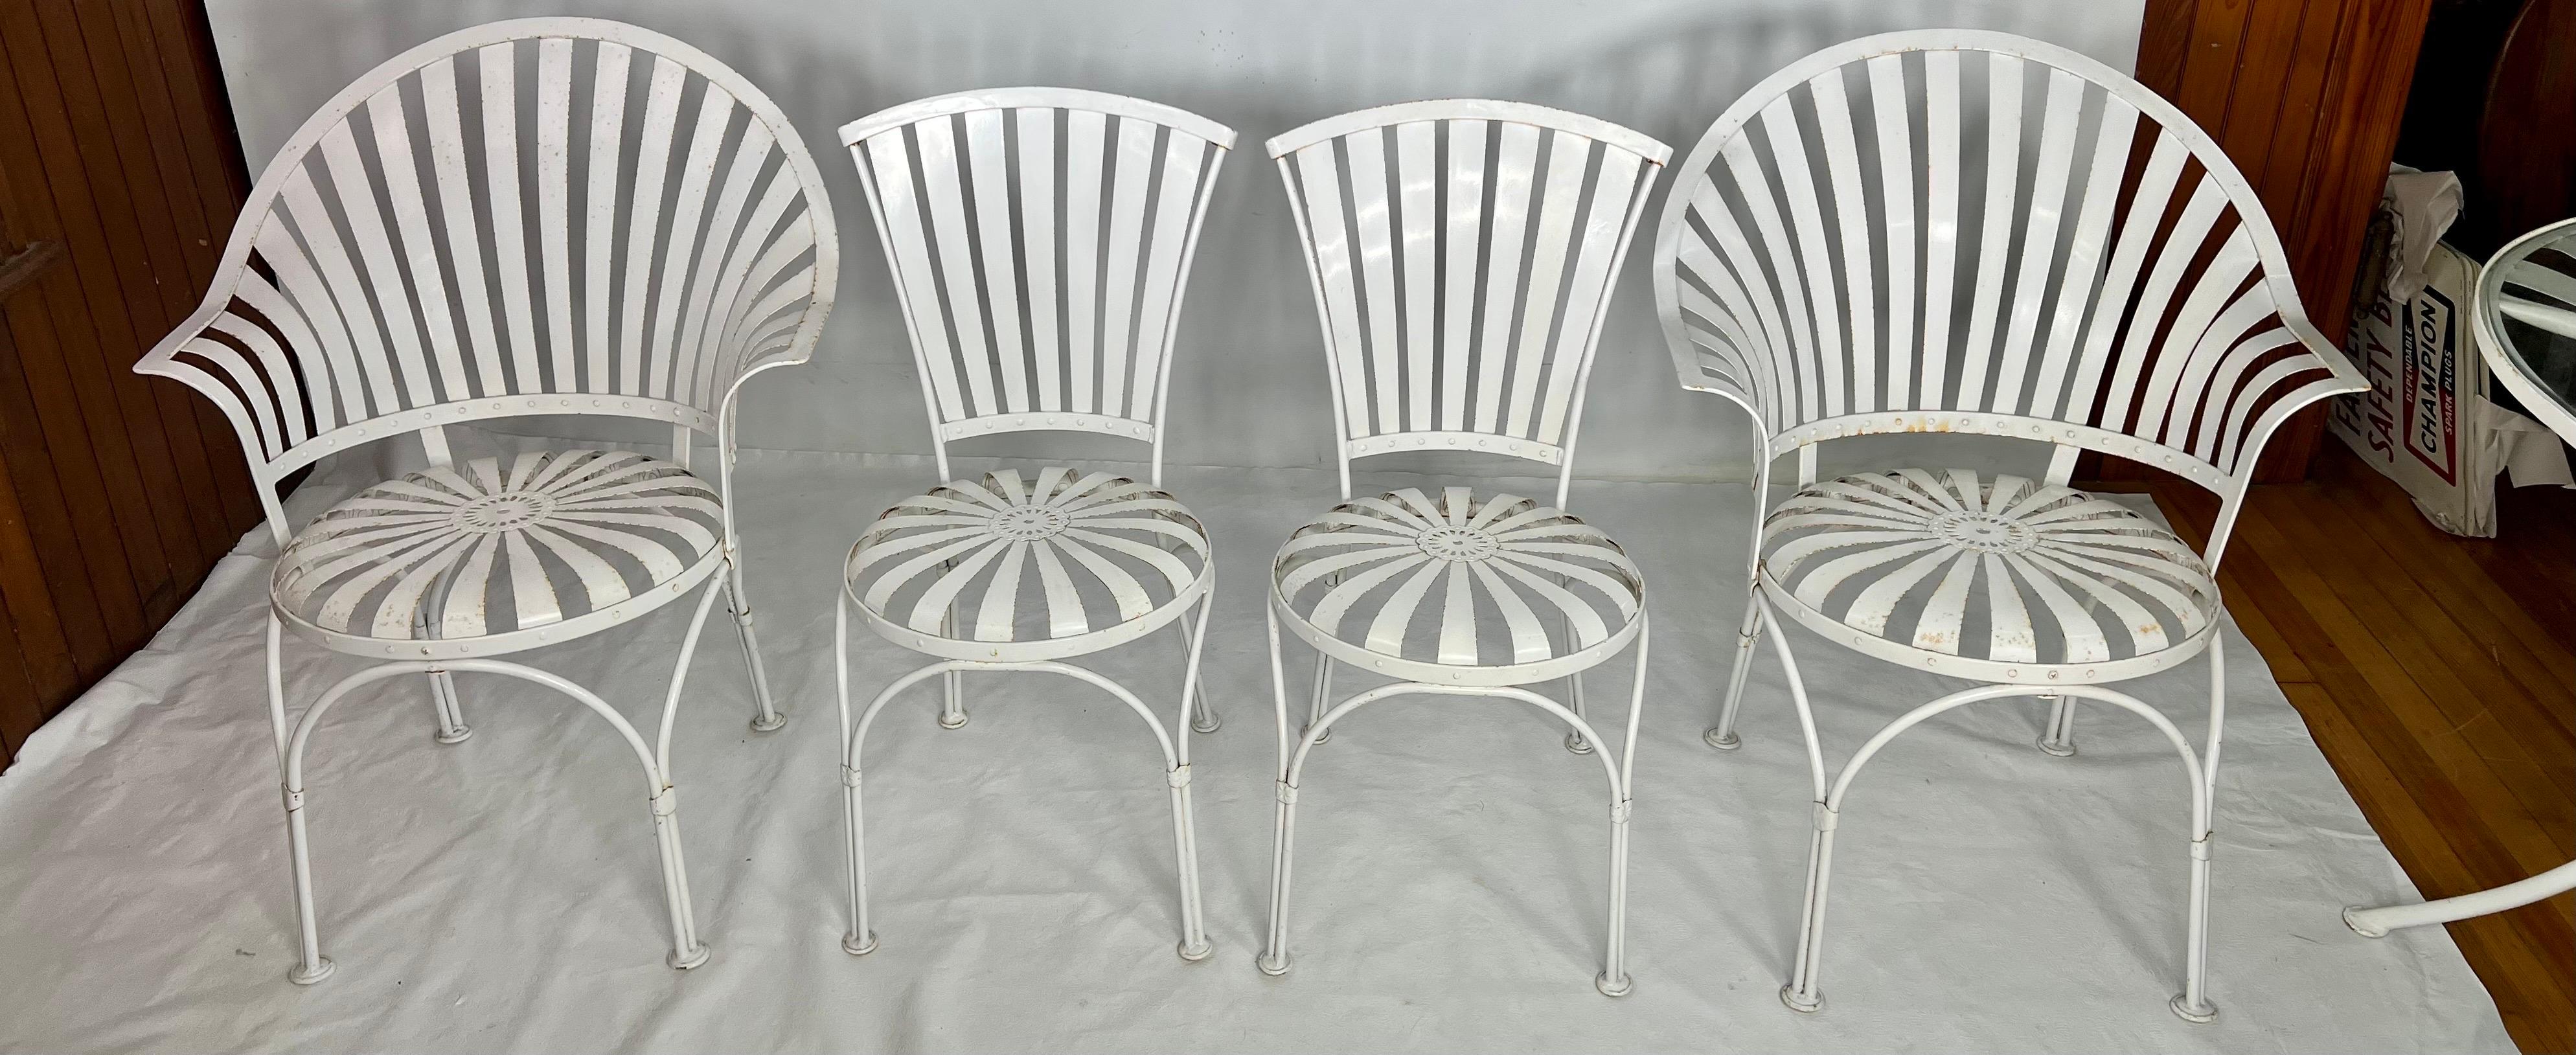 Iron Francois Carre Art Deco Patio Table and Chairs - 5 Piece Set For Sale